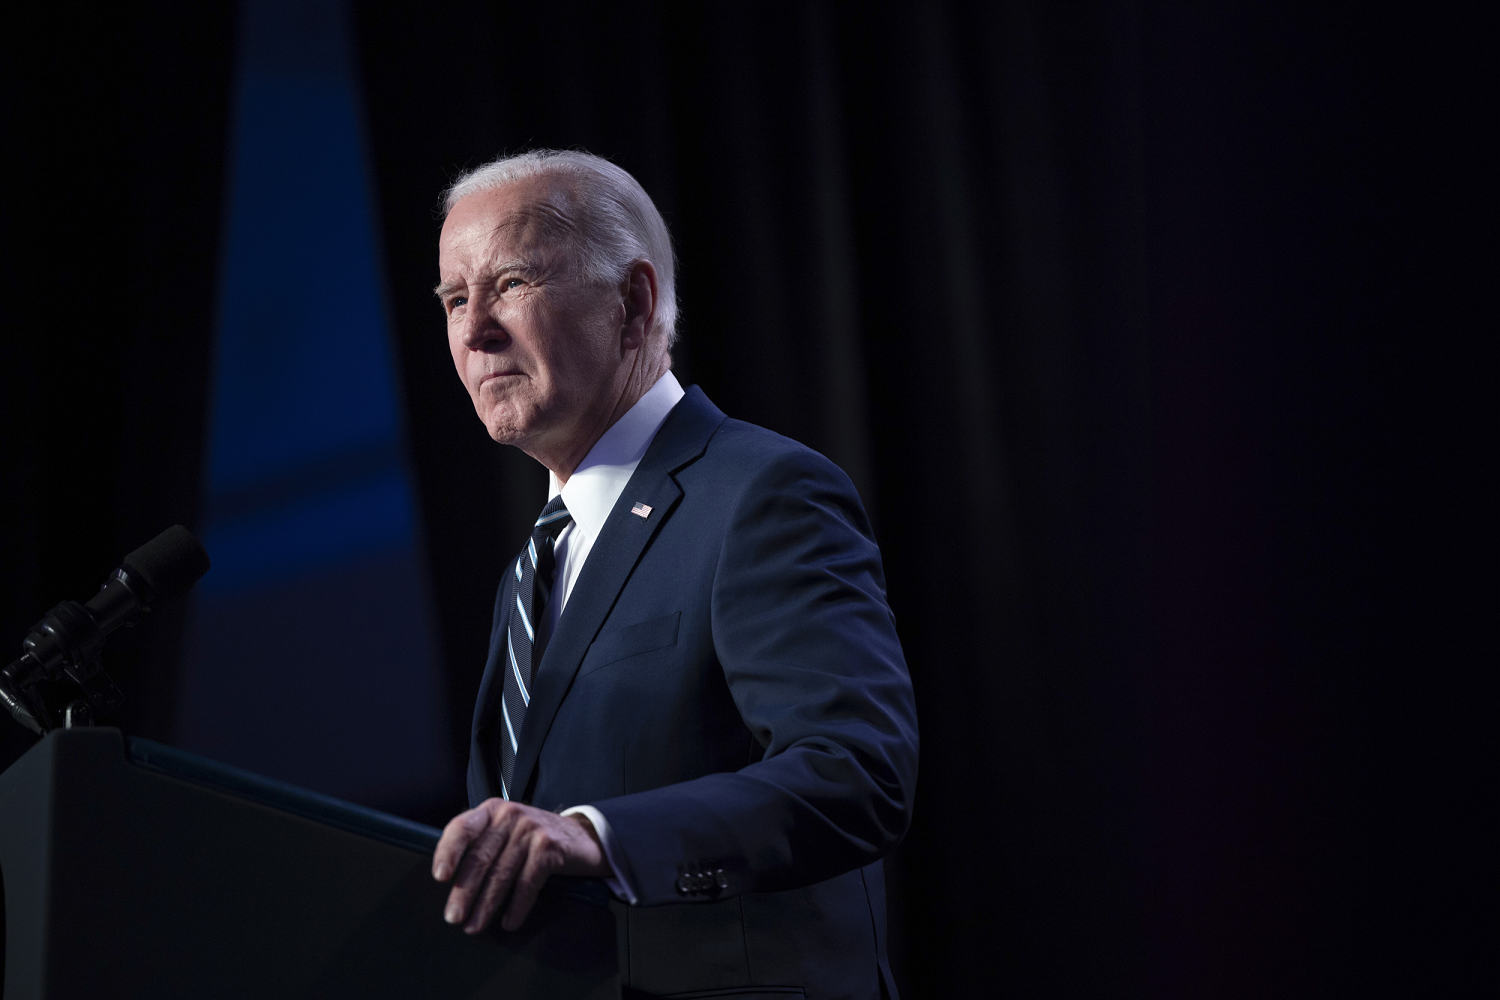 Biden announces more than 500 sanctions on Russia after Alexei Navalny's death